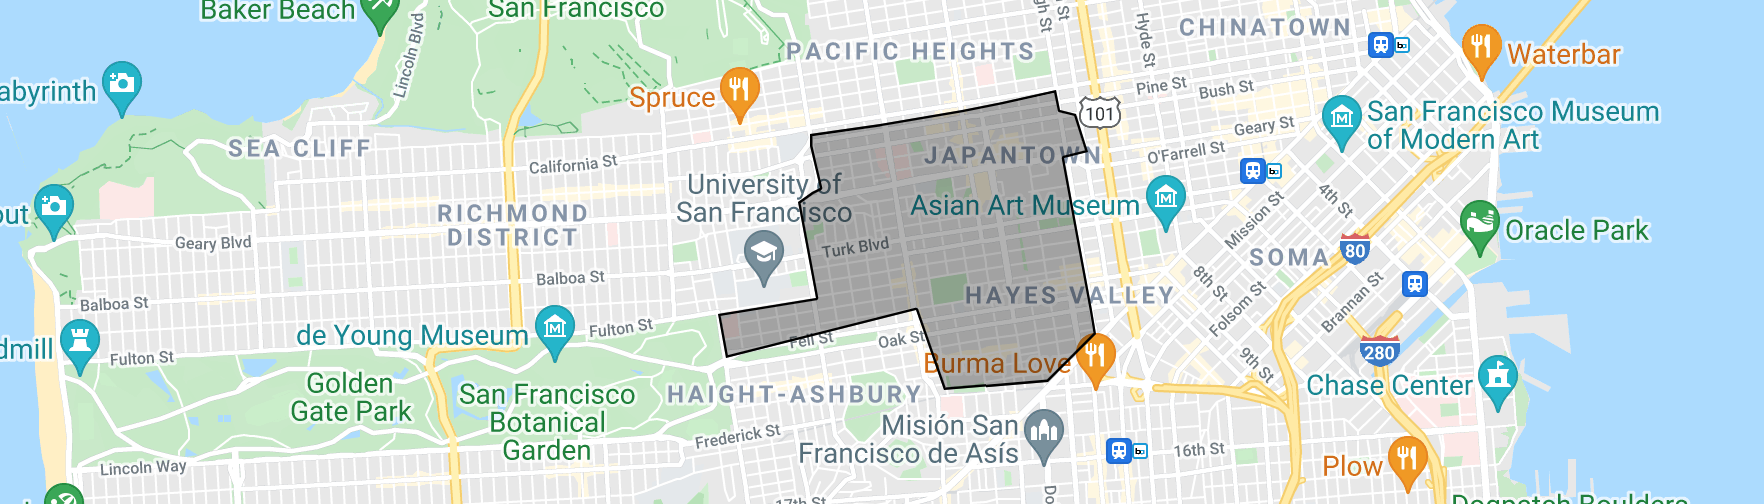 map of district 6 sf